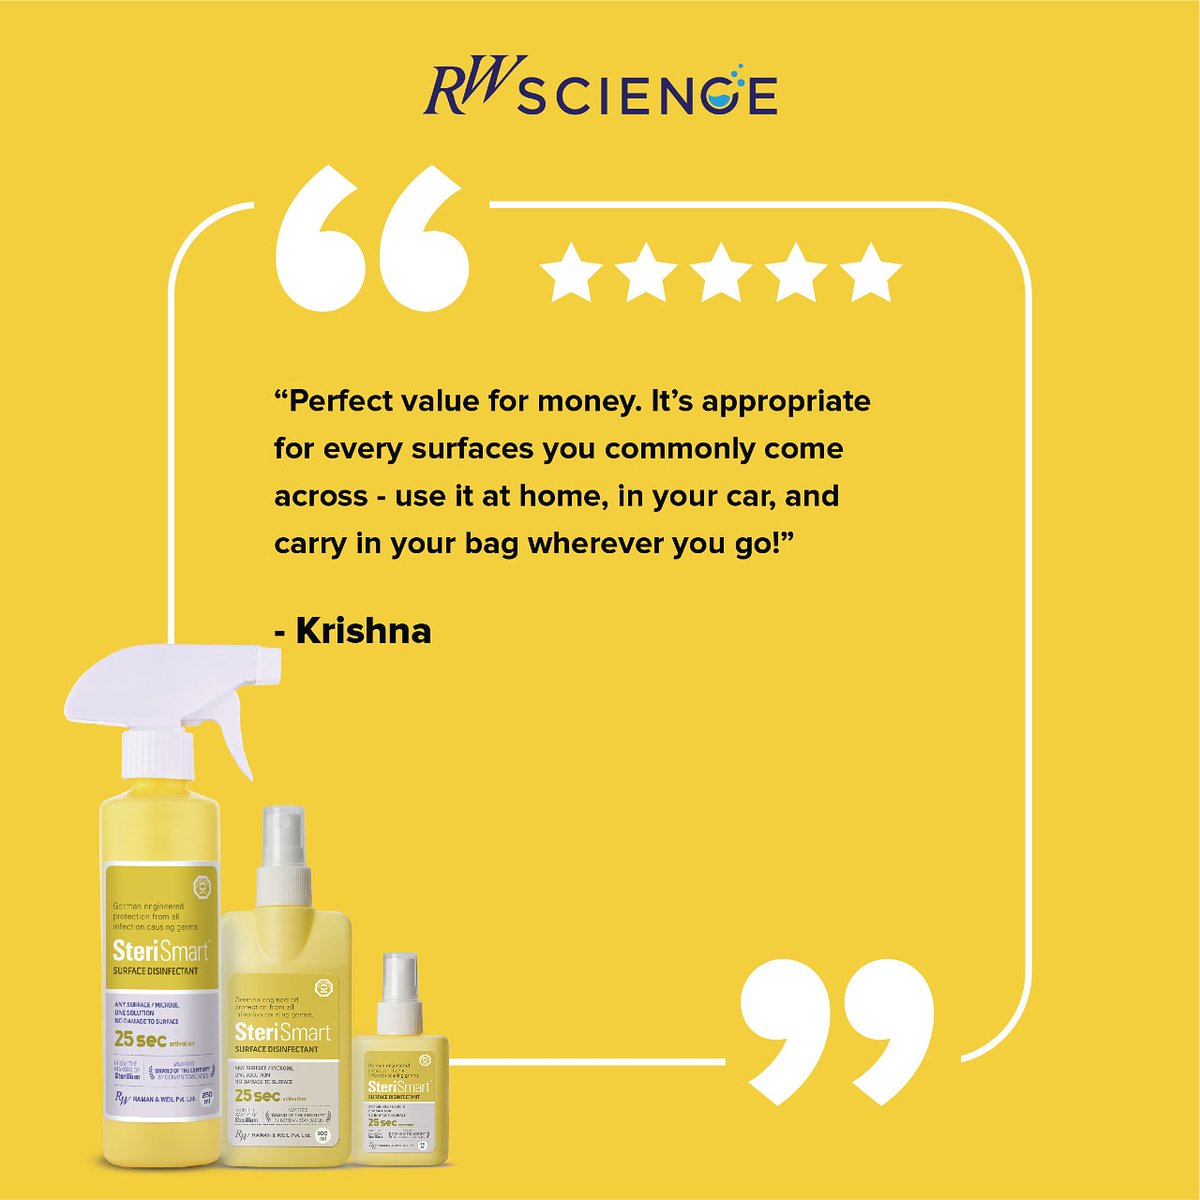 With excellent material compatibility, no residue and effects in just 25-seconds.. SteriSmart will quickly become your go-to disinfectant, no matter where you go.


#RWScience #IndianScience #Steri360 #customerreview #madeinindia #science  #healthexperts #stayhealthy #WHO